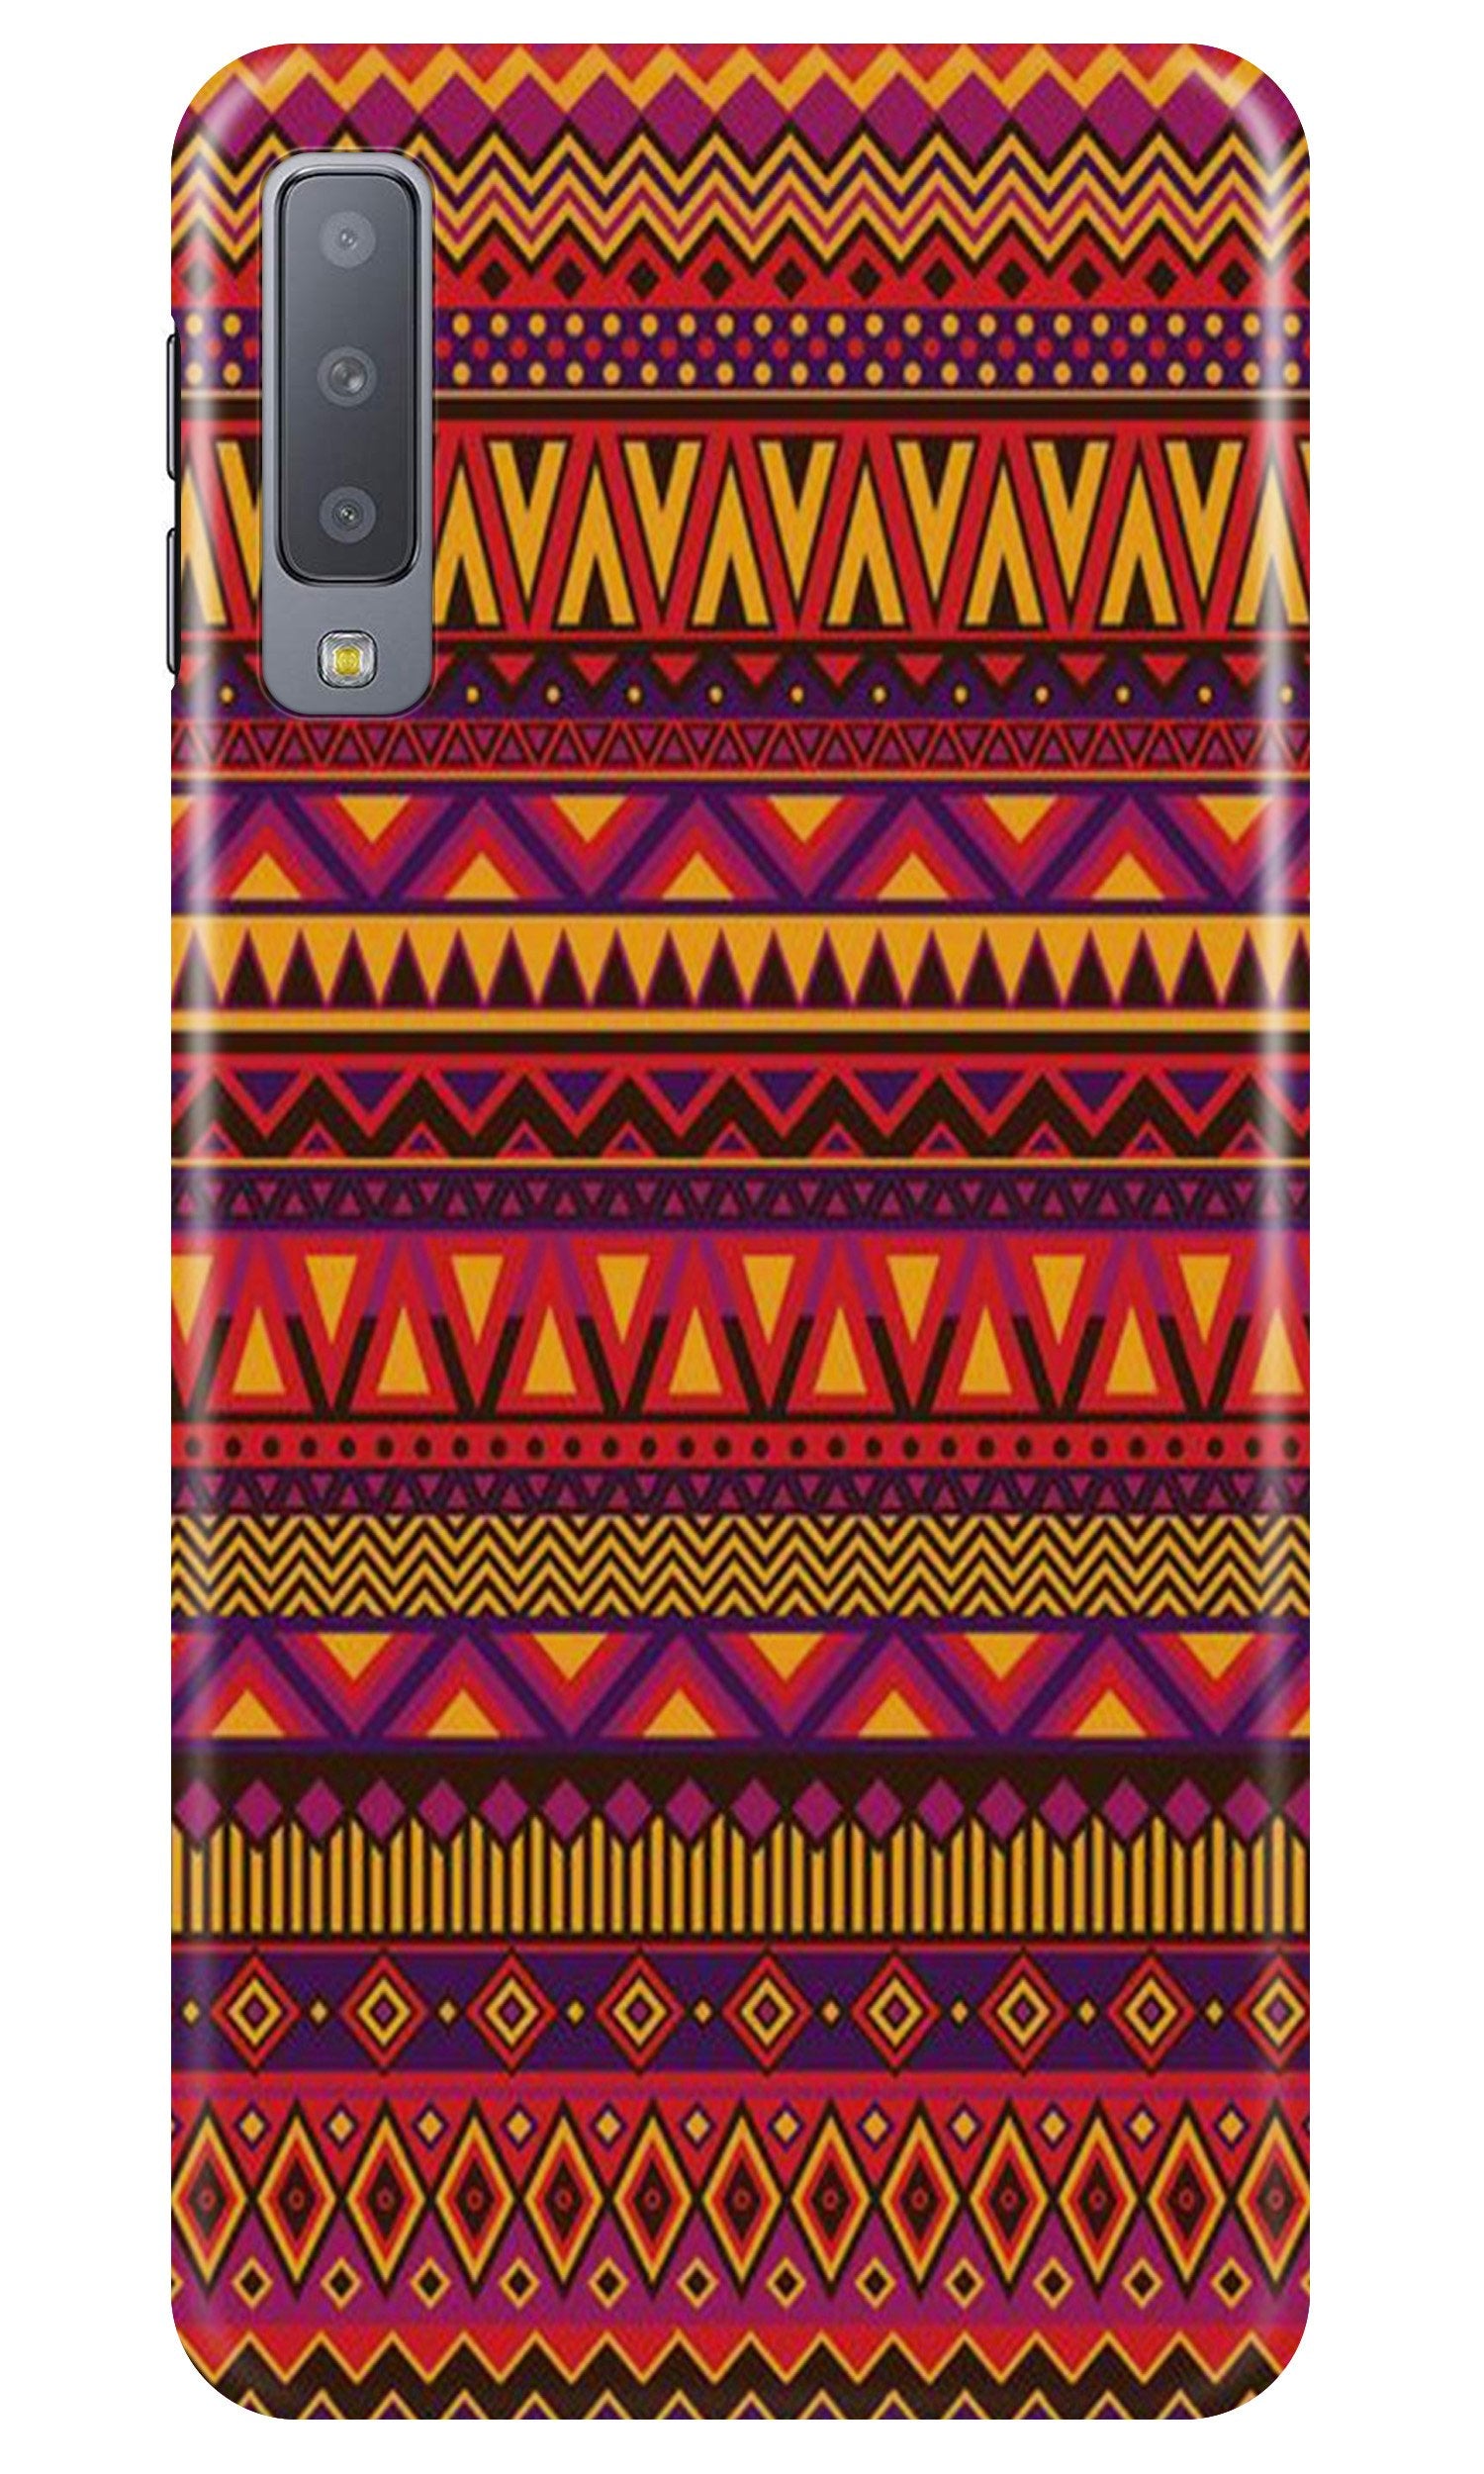 Zigzag line pattern2 Case for Galaxy A7 (2018)